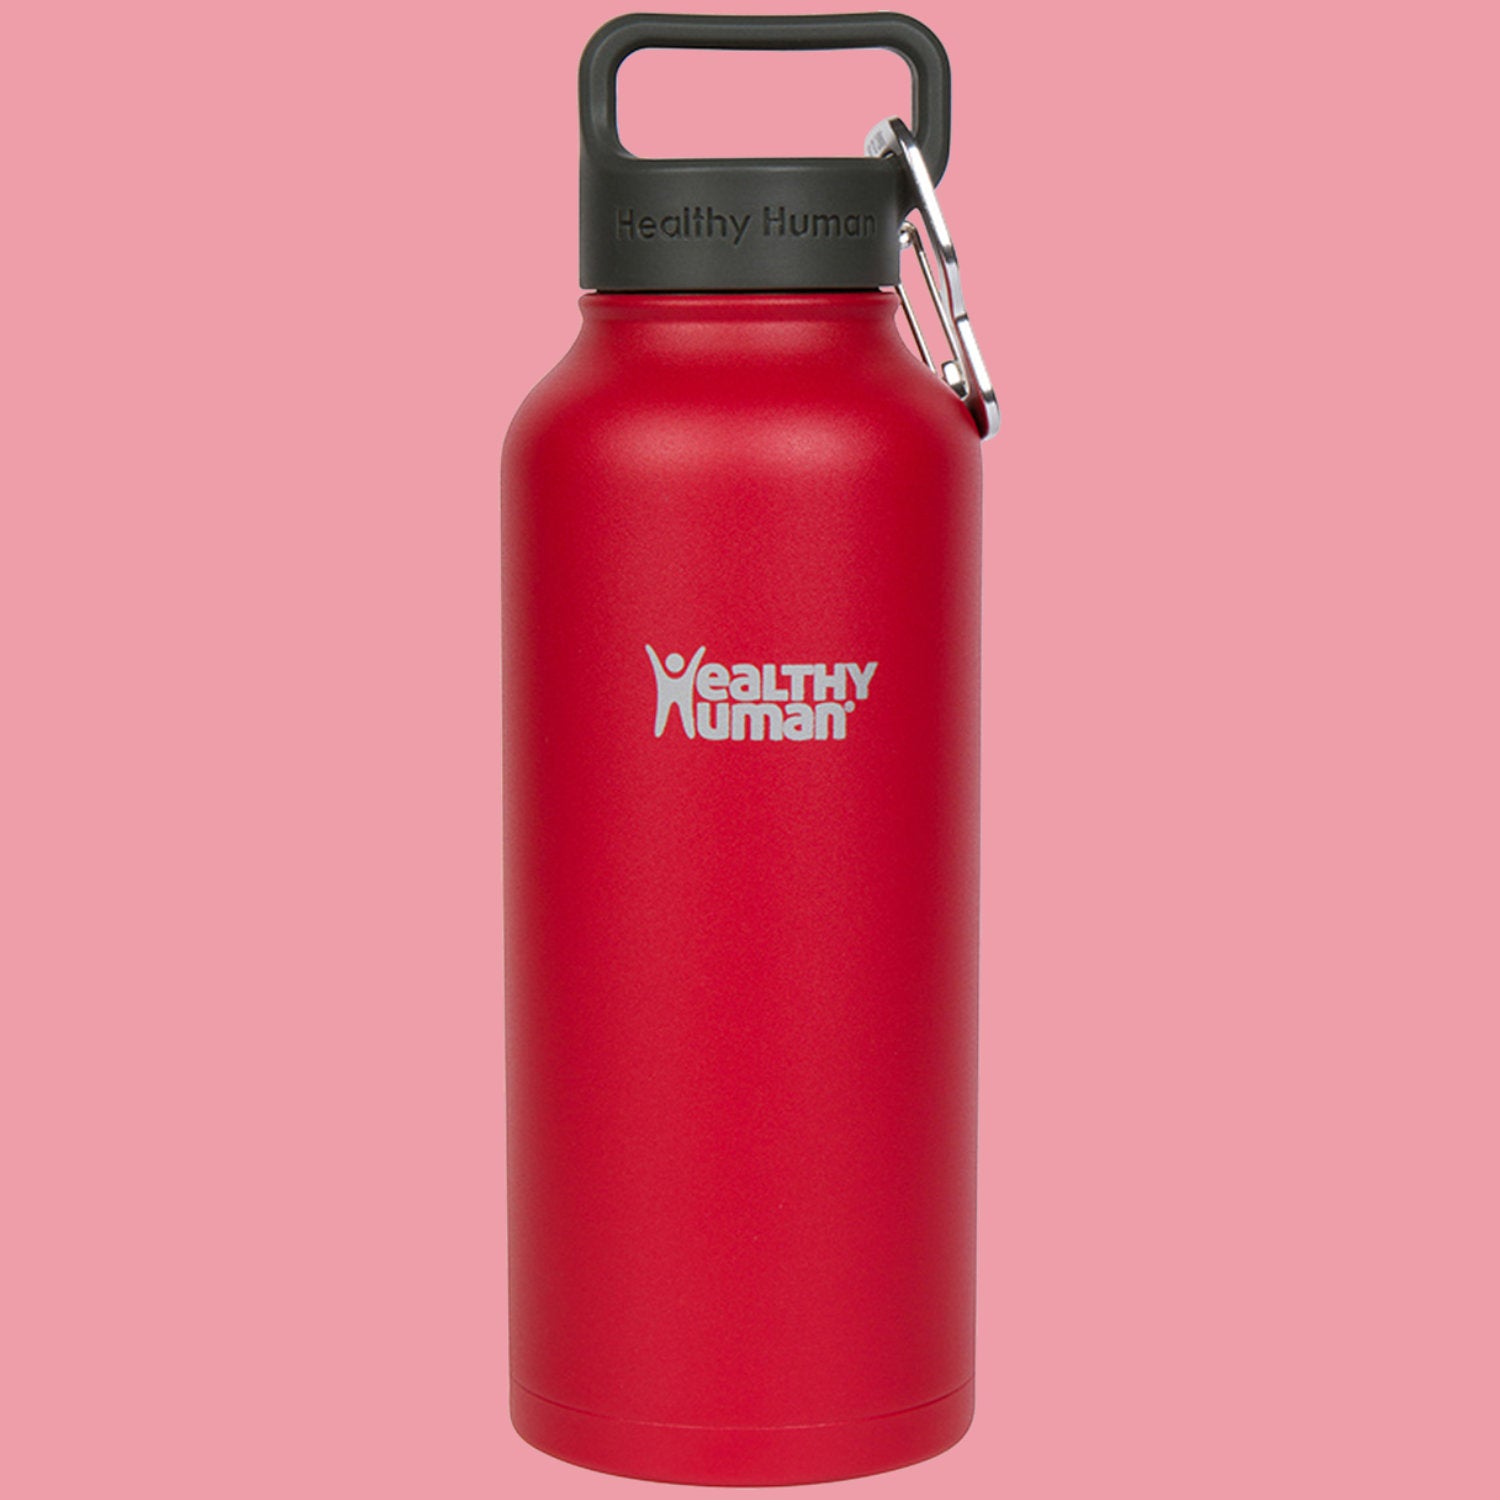 32oz Clear filter Insulated Plastic Water Bottle